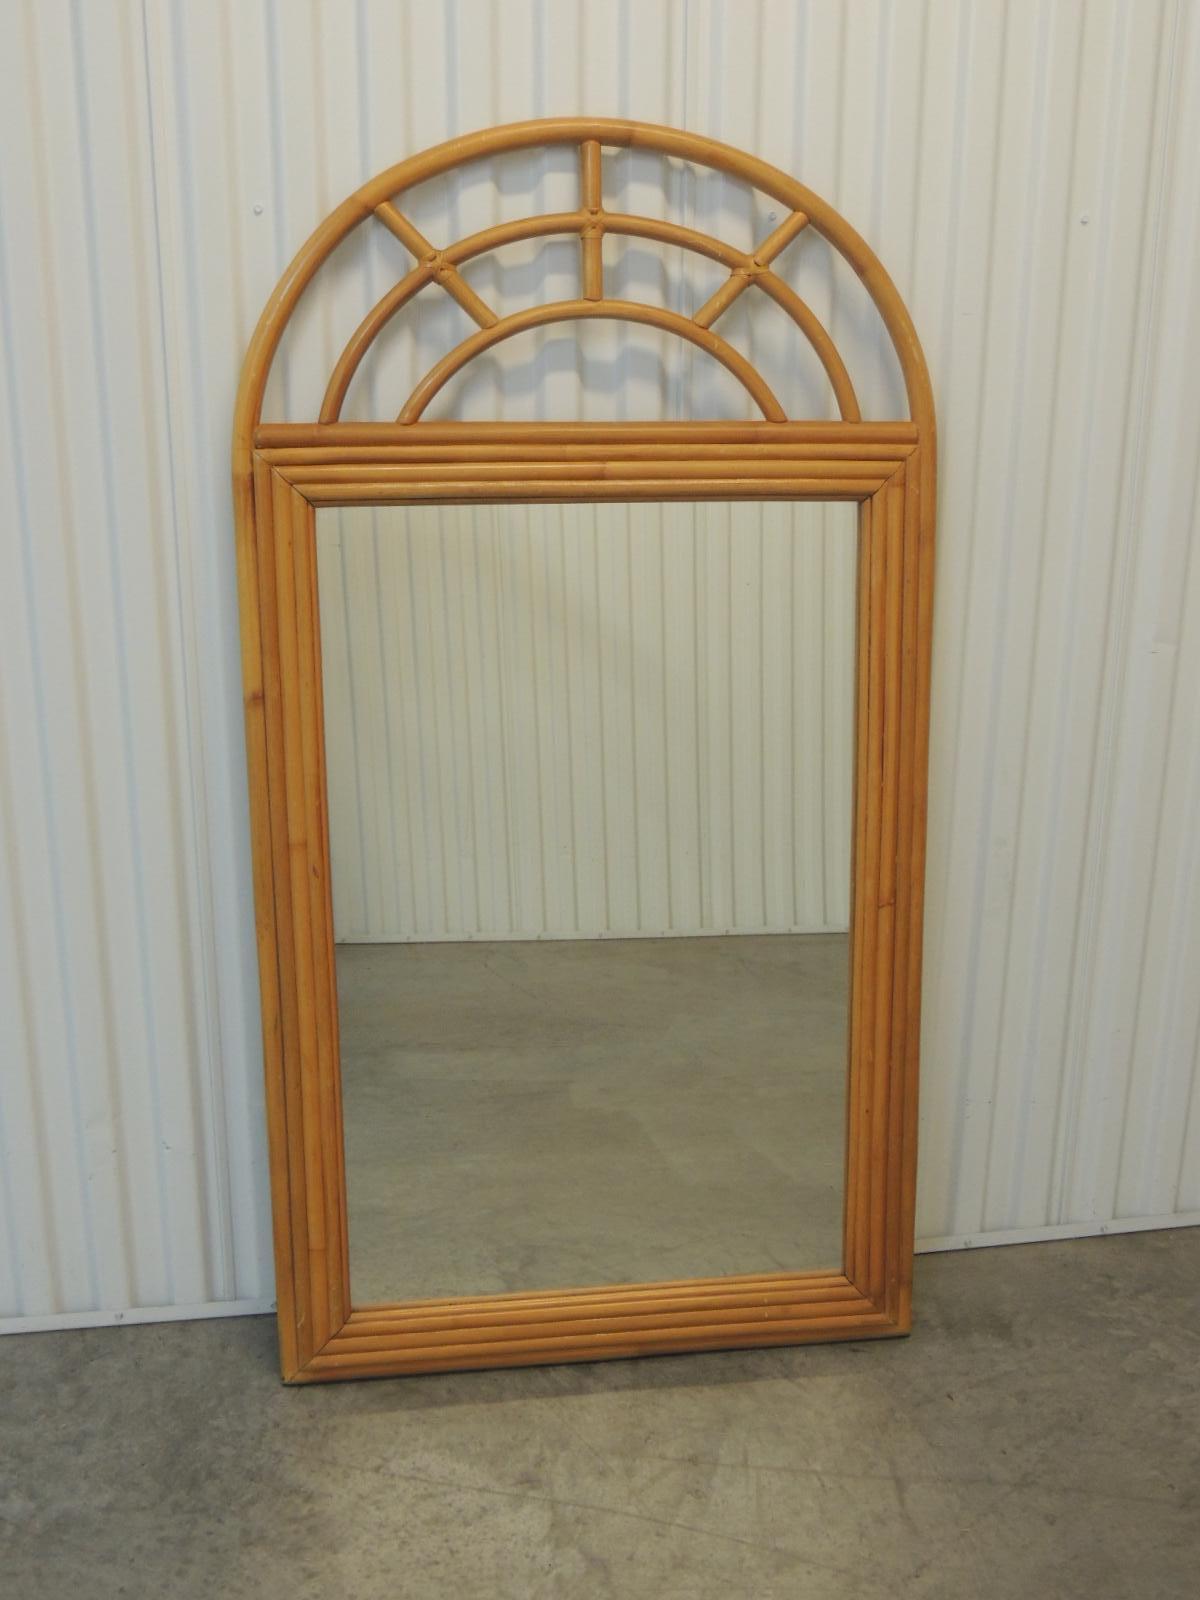 Vintage large bamboo mirror
Tall wall mirror with bended bamboo top
Handing crane in the bac
Size: 28 W x 51.25 H x 1.5 D.
 